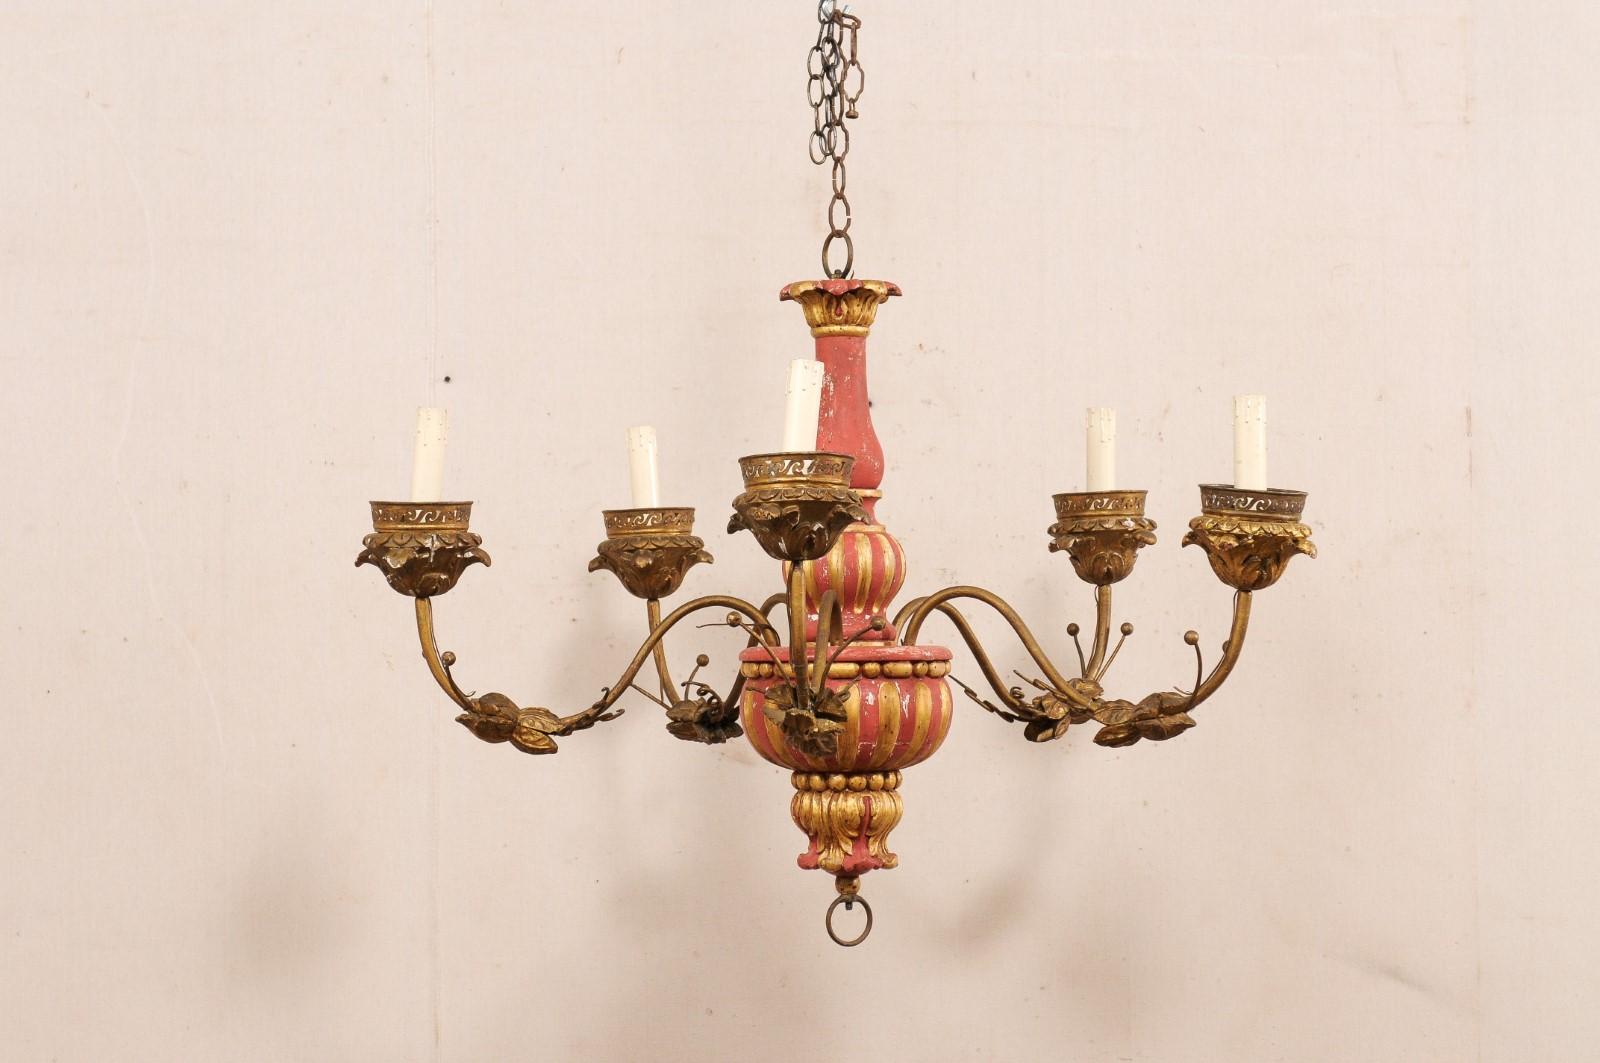 An Italian painted wood chandelier with metal arms, from the early 20th century. This antique chandelier from Italy features a wood central column with beaded, fluted, and acanthus-carved details, which has five fluid s-shaped swooping arms lifting